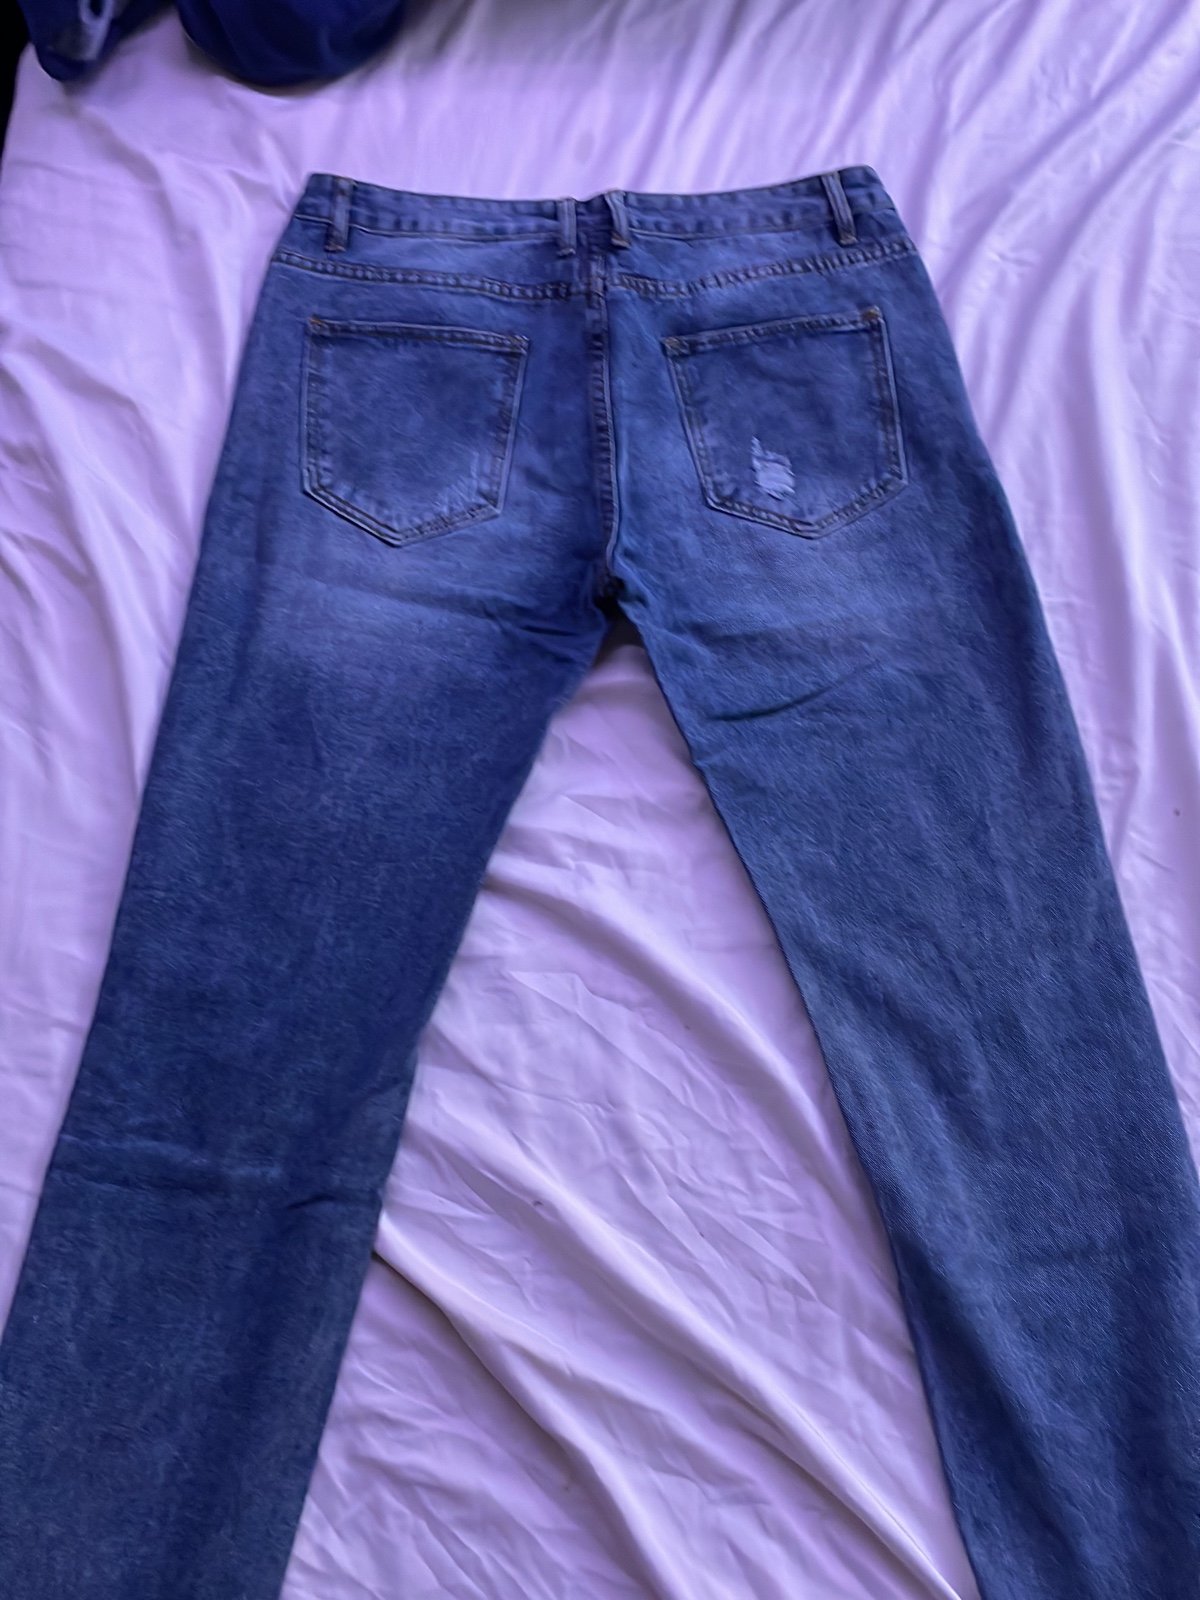 Cheap jeans OVhEWc9gy well sale